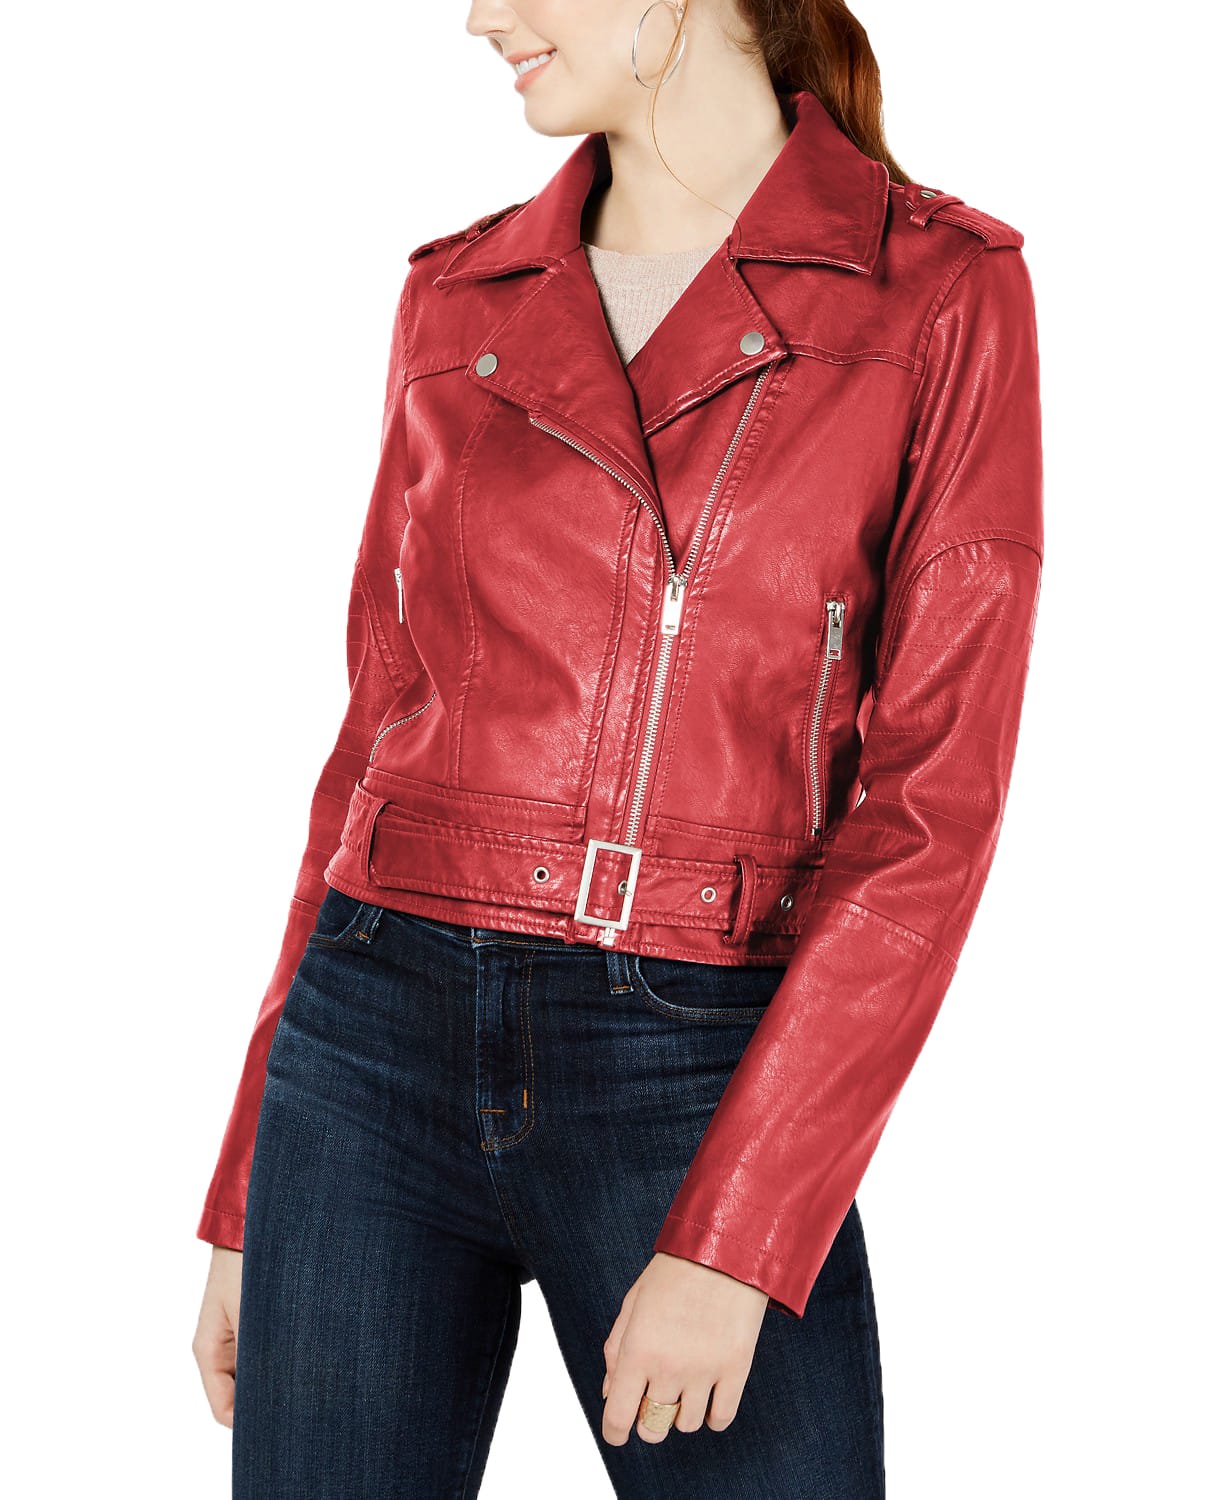 woocommerce-673321-2209615.cloudwaysapps.com-collection-womens-wine-faux-leather-belted-moto-jacket